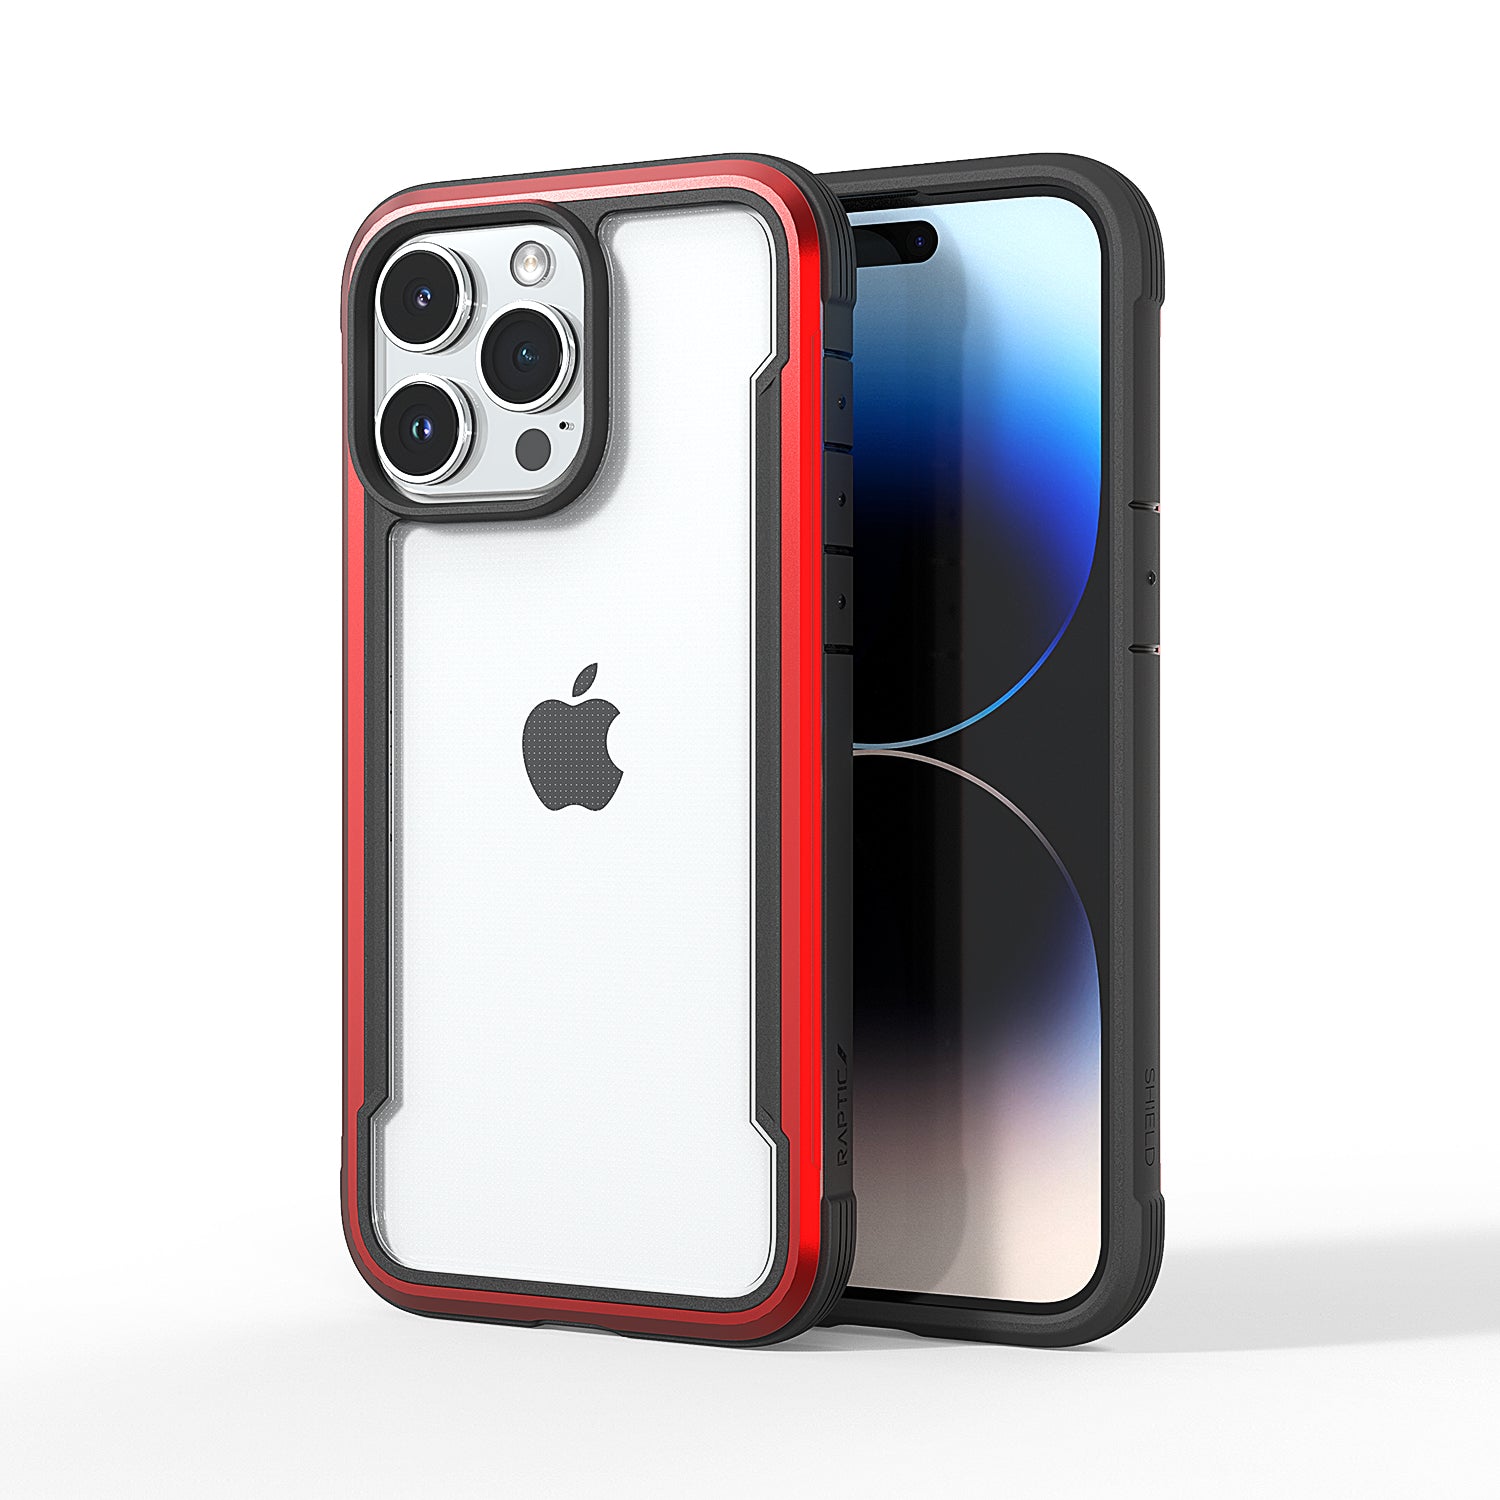 The iphone 11 pro case is shown in red and black, offering 3-metre drop protection.